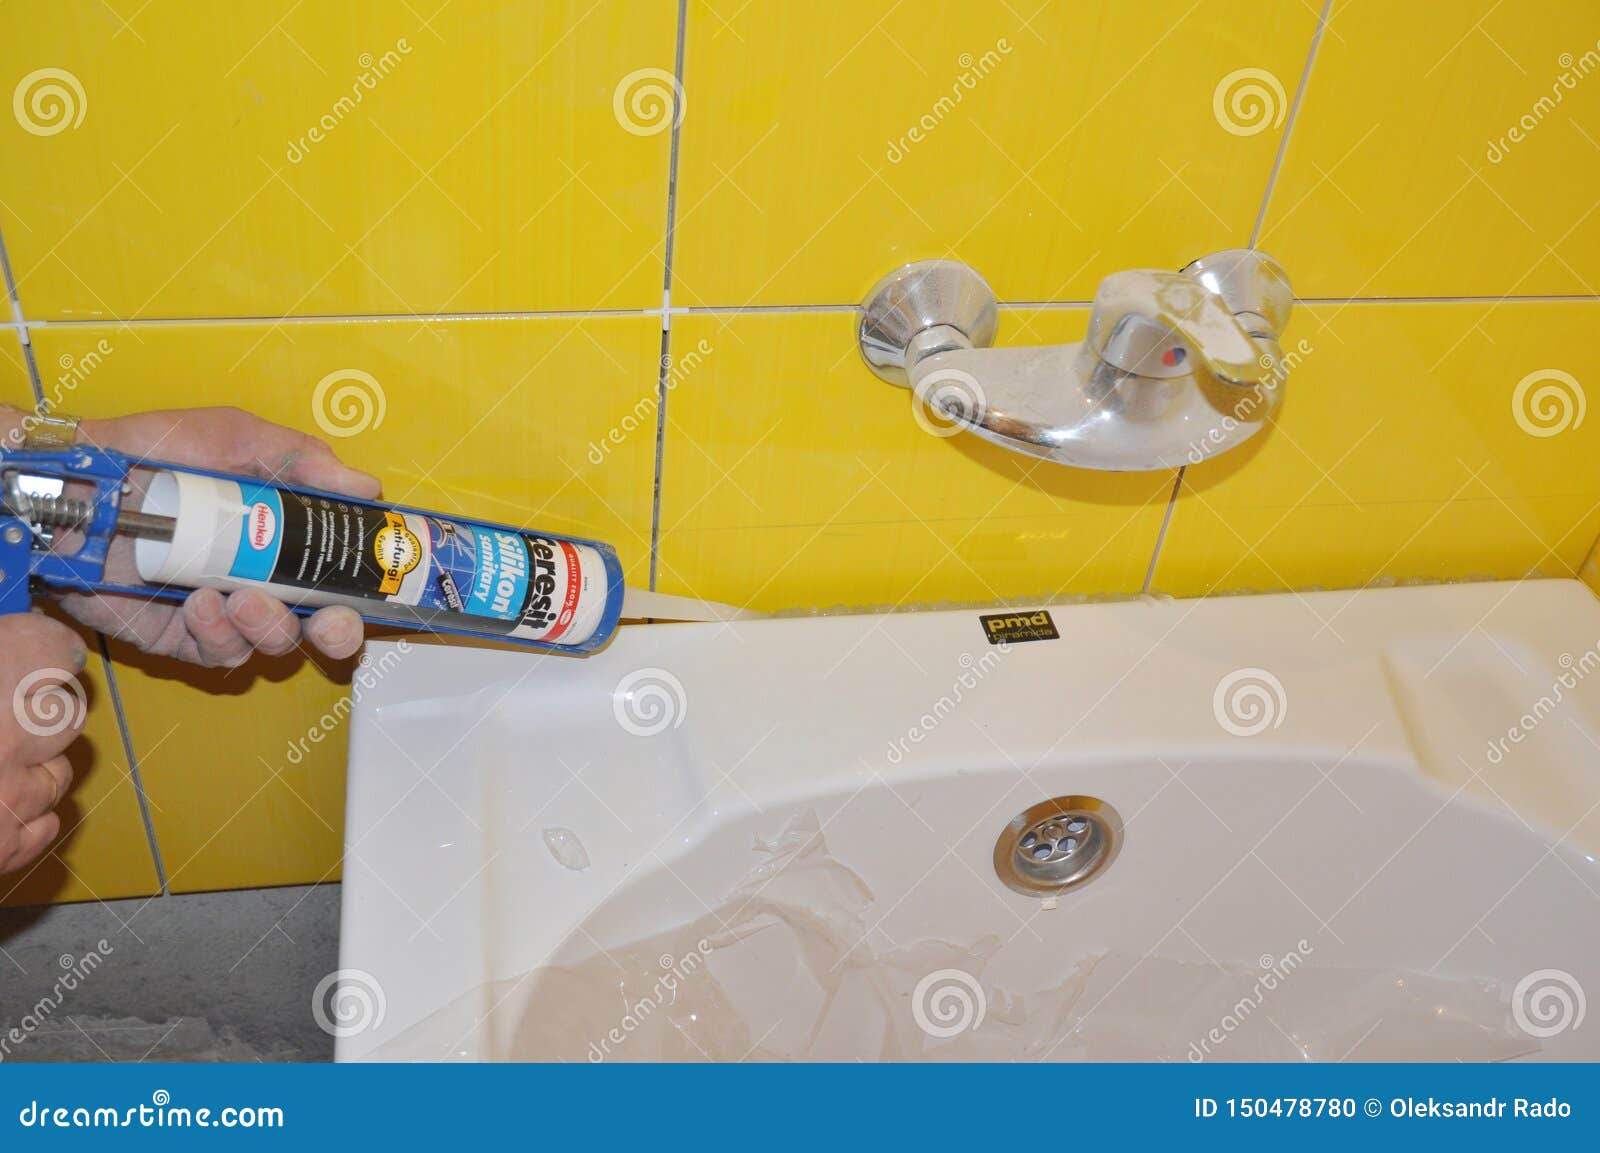 Bath Tube Installation With Silicone Bathroom Caulk Water Tap In The Yellow Tiled Bathroom Repair Bathroom With New Bath Tube Editorial Image Image Of Bath Yellow 150478780